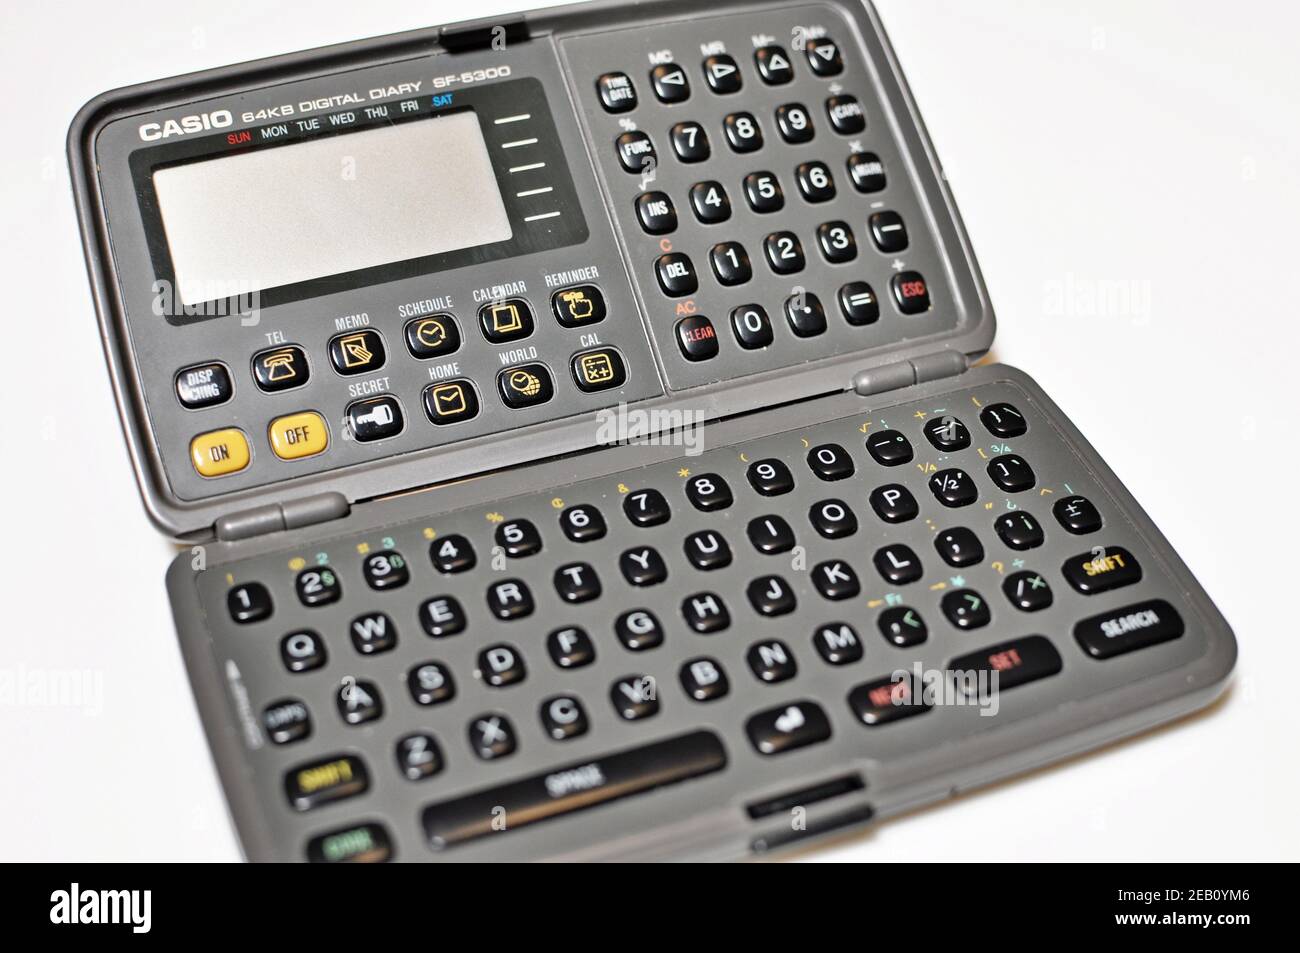 Vintage technology. Front view of an open personal digital diary calculator Stock Photo